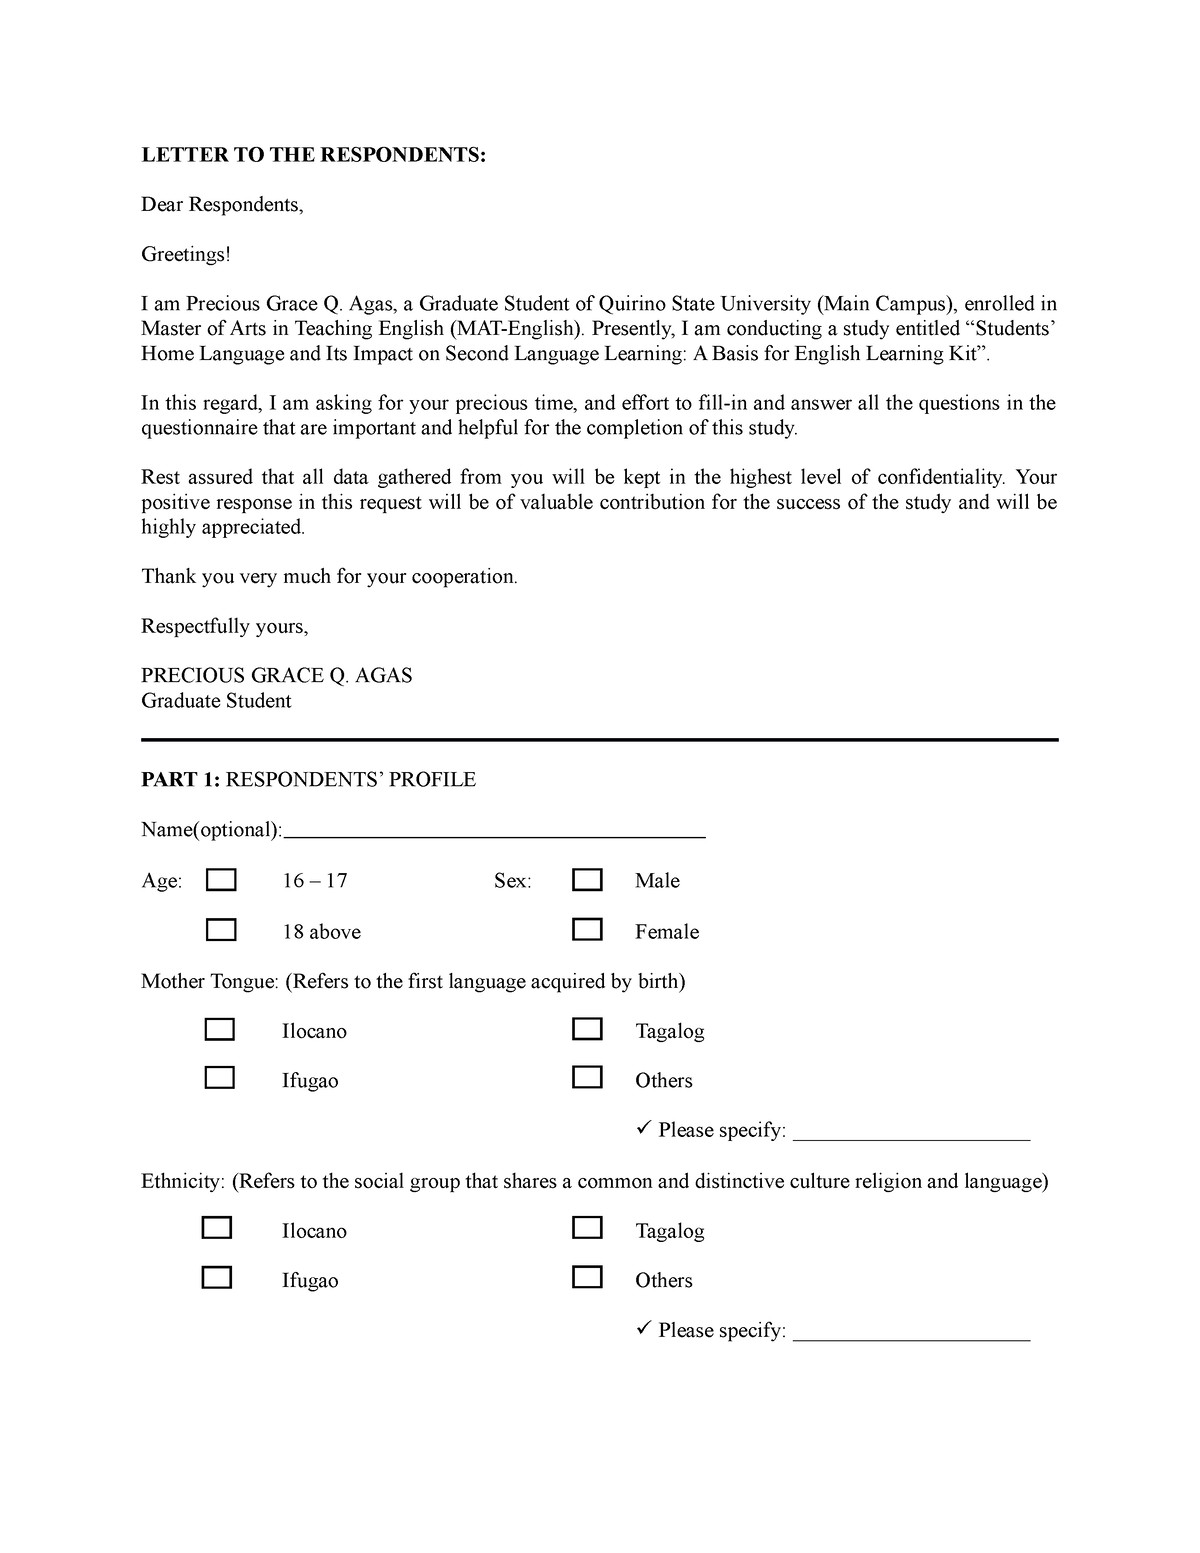 research consent letter for respondents